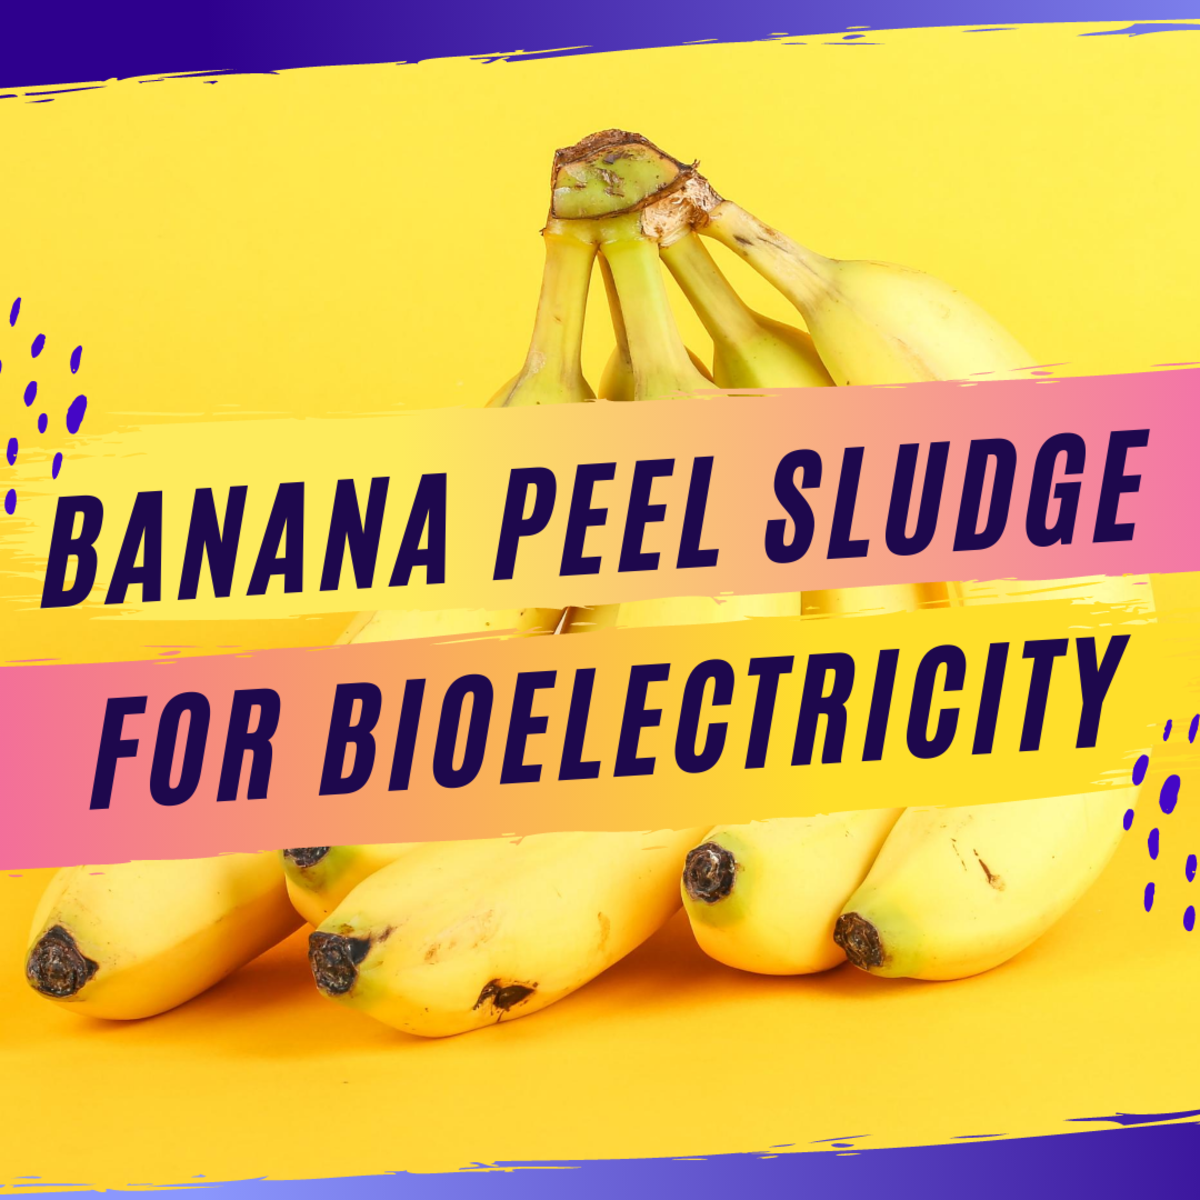 Can banana peel sludge be used for bioelectricity?